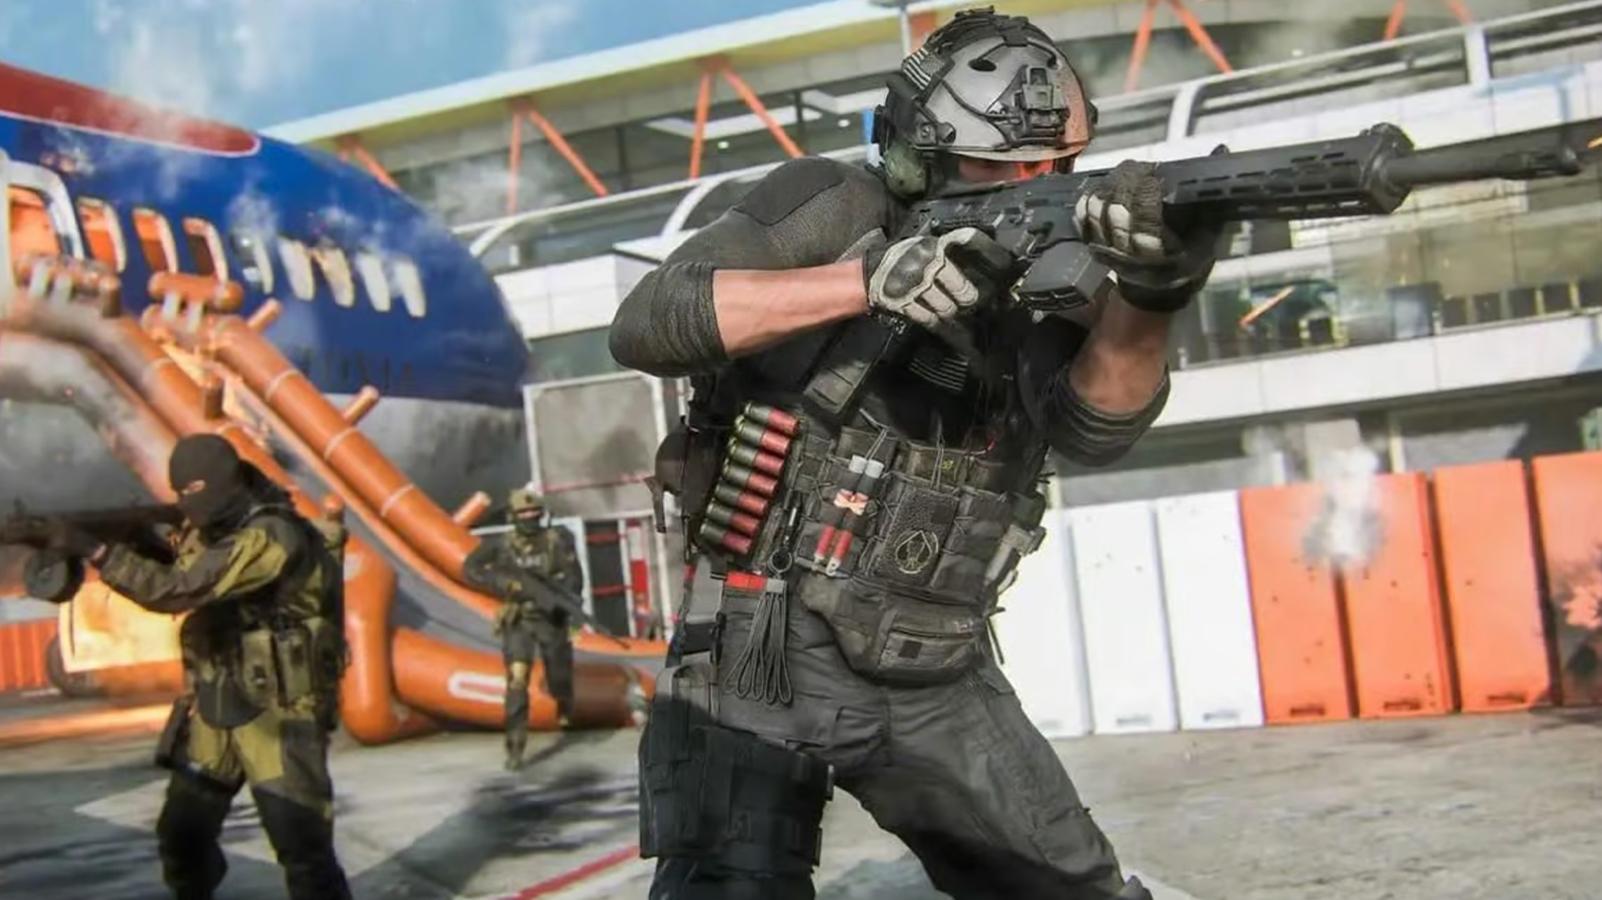 Here's what's in the $120 version of Call of Duty: Advanced